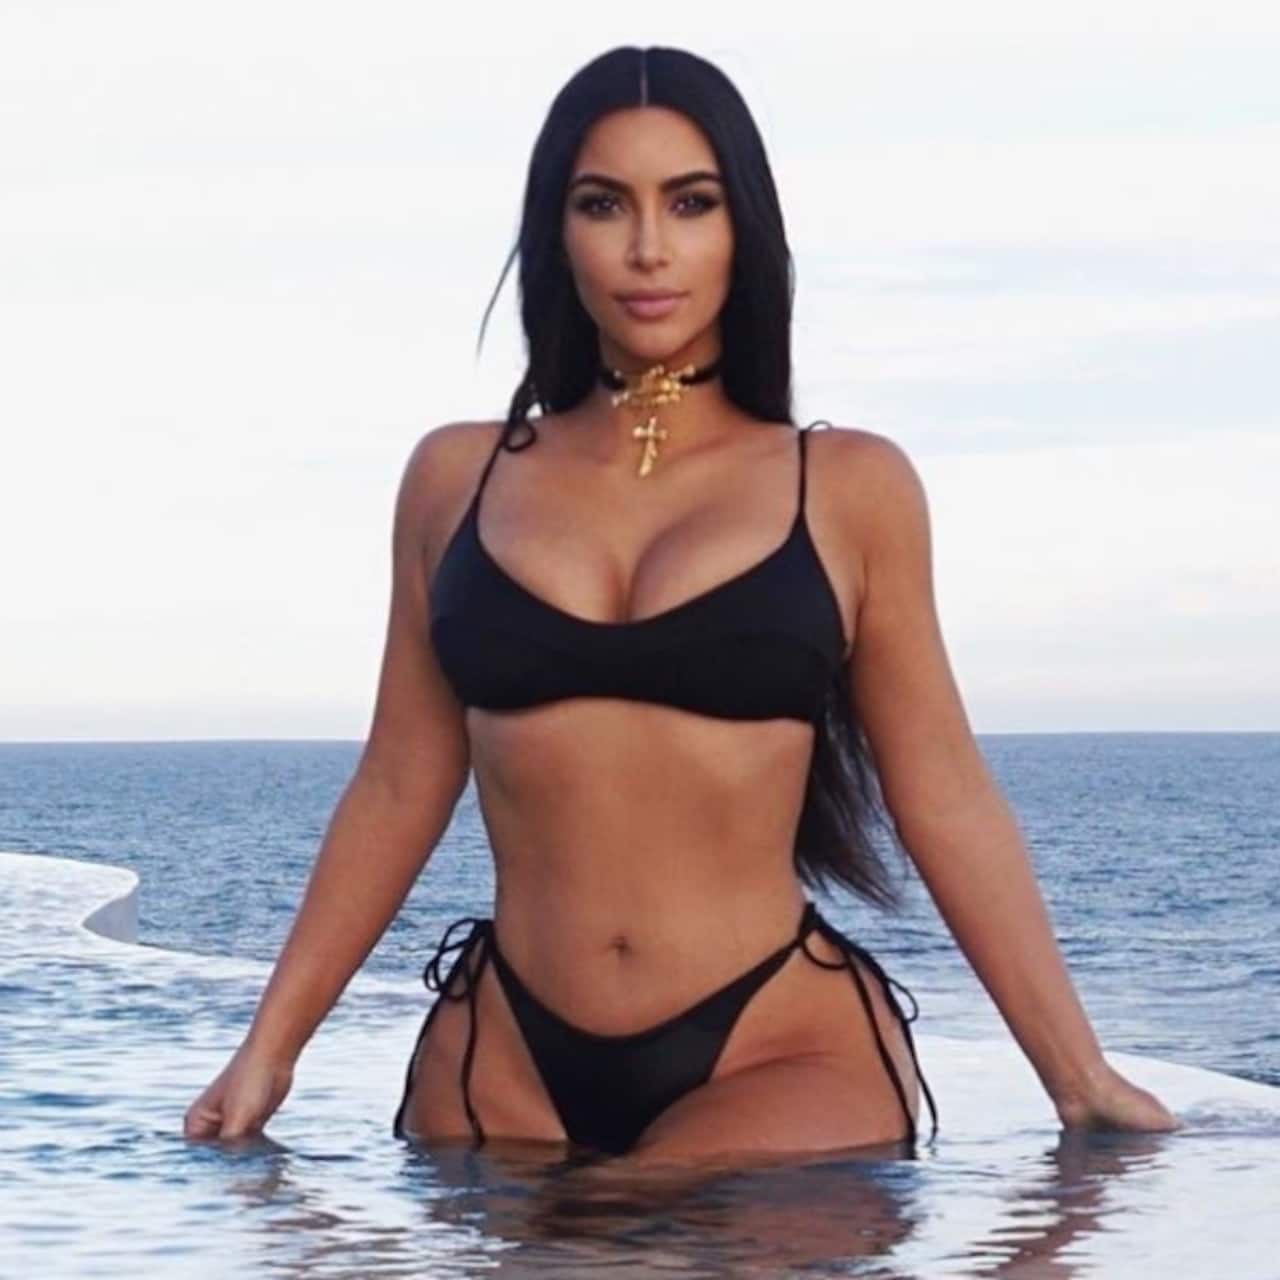 Kim Kardashian REACTS to allegations of pedophilic representation in a brand campaign involving children; says, 'As a mother of four...'